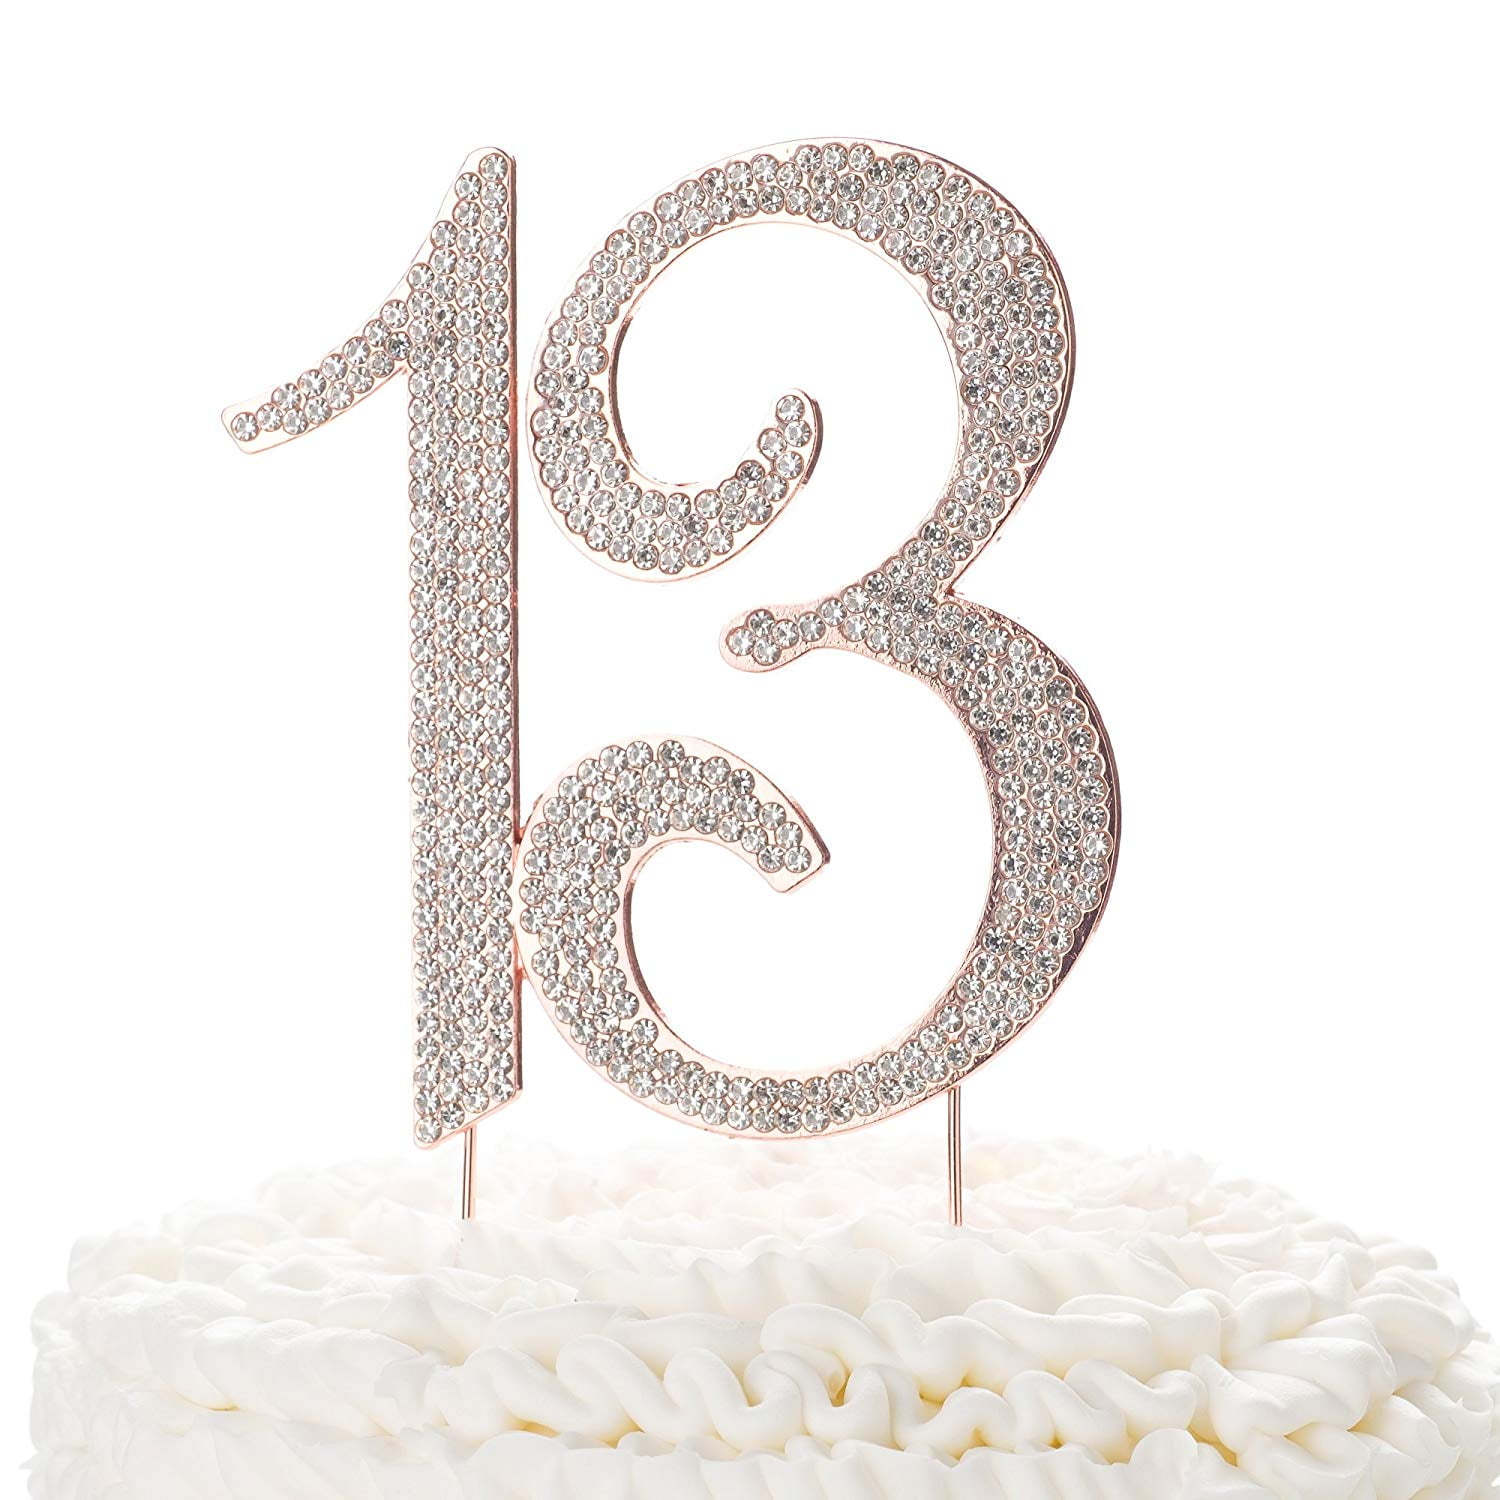 Script Name is 13 Team Cake Topper – Quick Creations